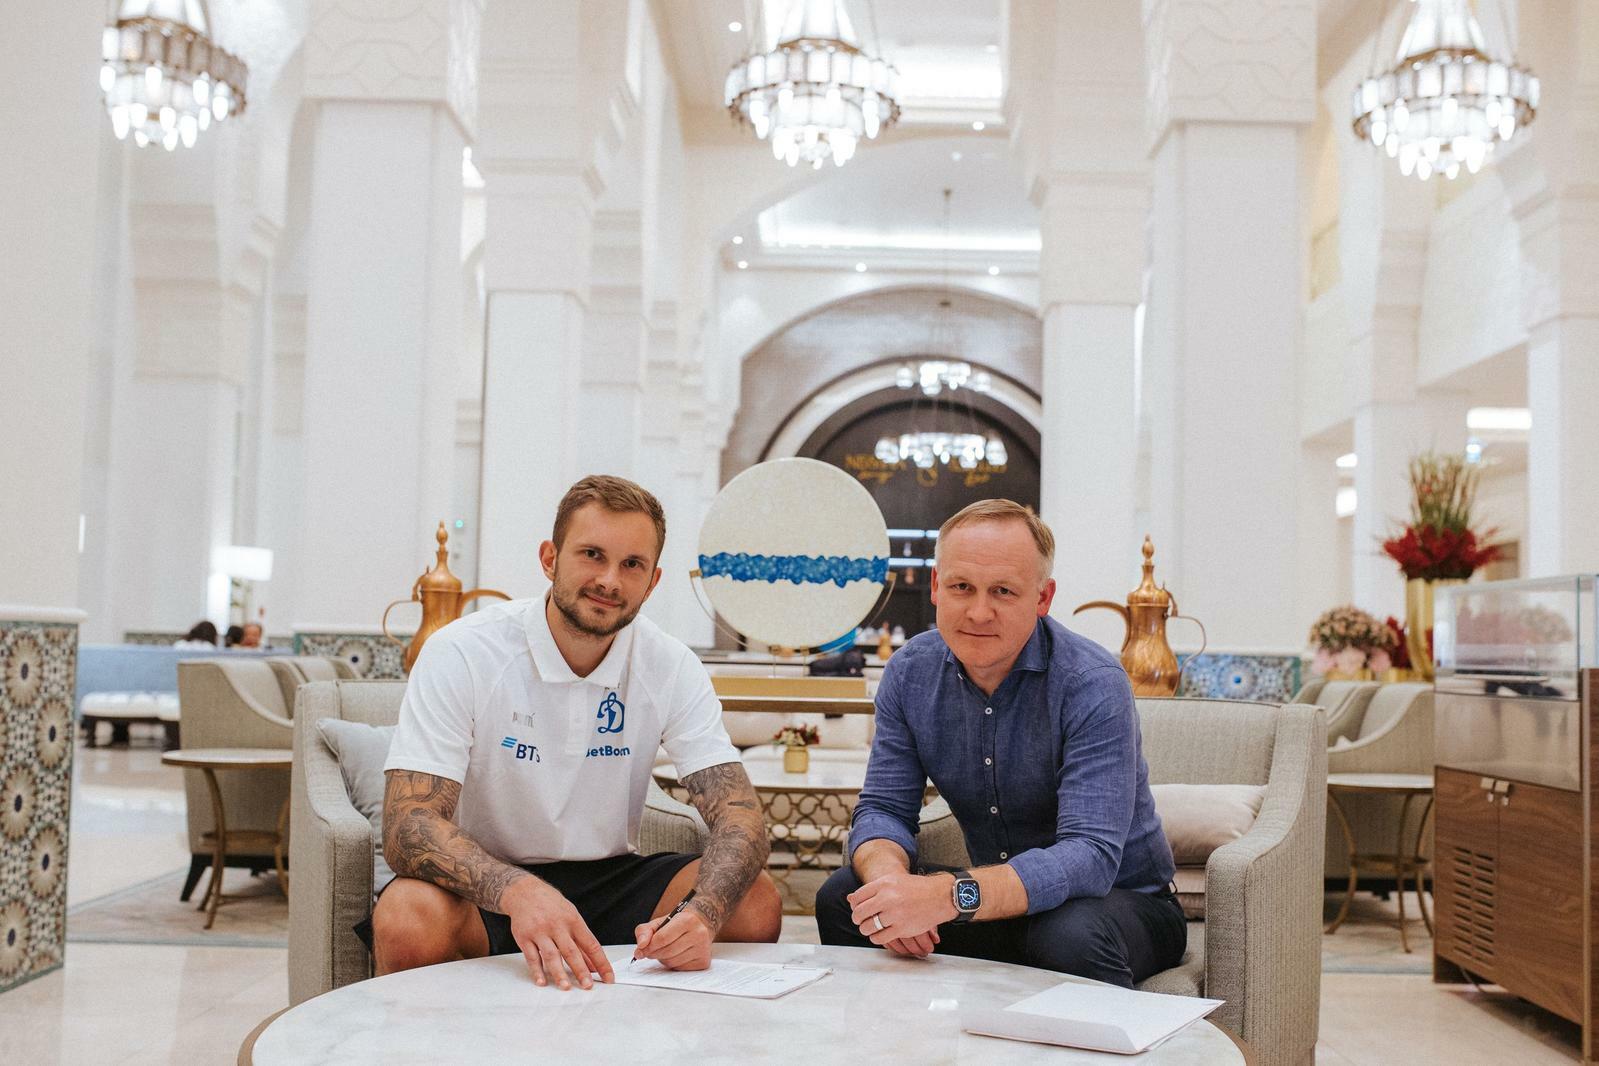 FC Dynamo Moscow News | Igor Leshchuk: "Dynamo is like a second home to me, one I don't want to leave." Official Dynamo Club Website.